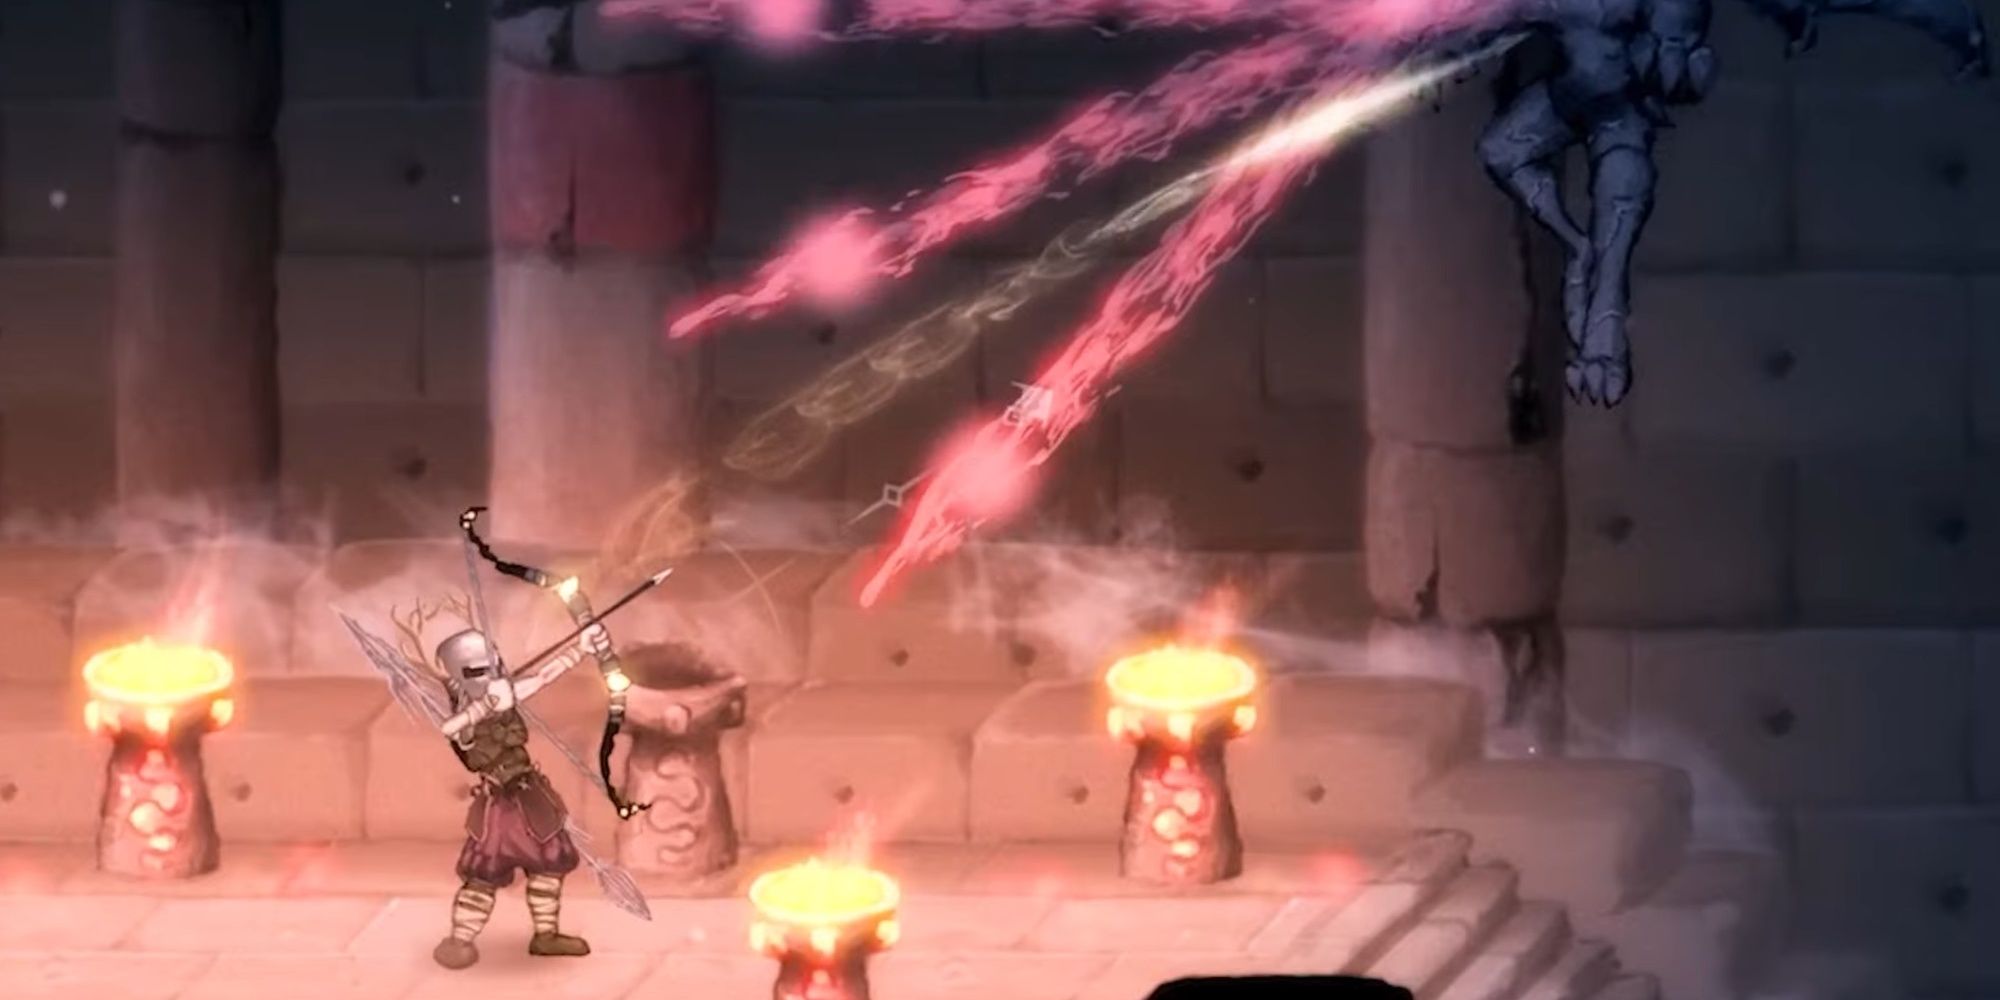 Player firing a bow and arrow at a flying monster in Salt and Sacrifice